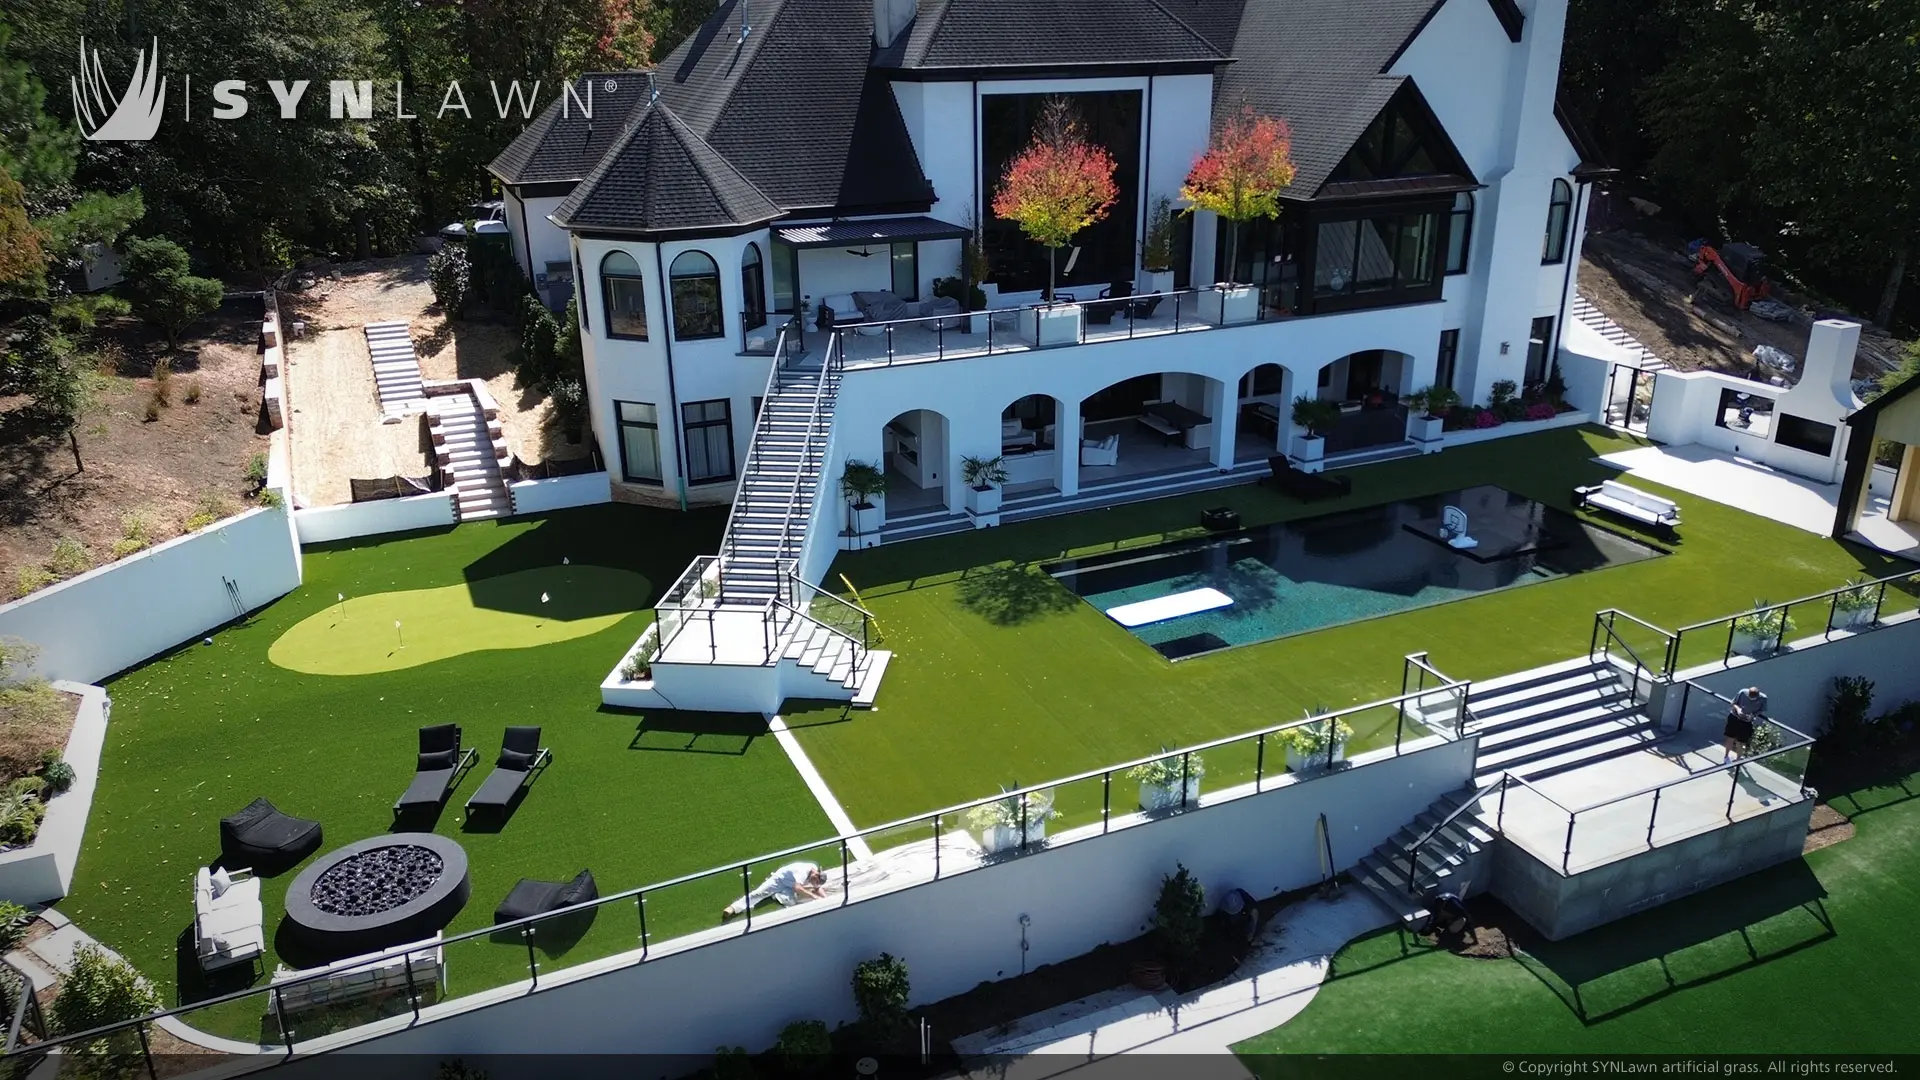 Former Football Player Builds Outdoor Living and Sports Training Complex at Luxury Dream Home